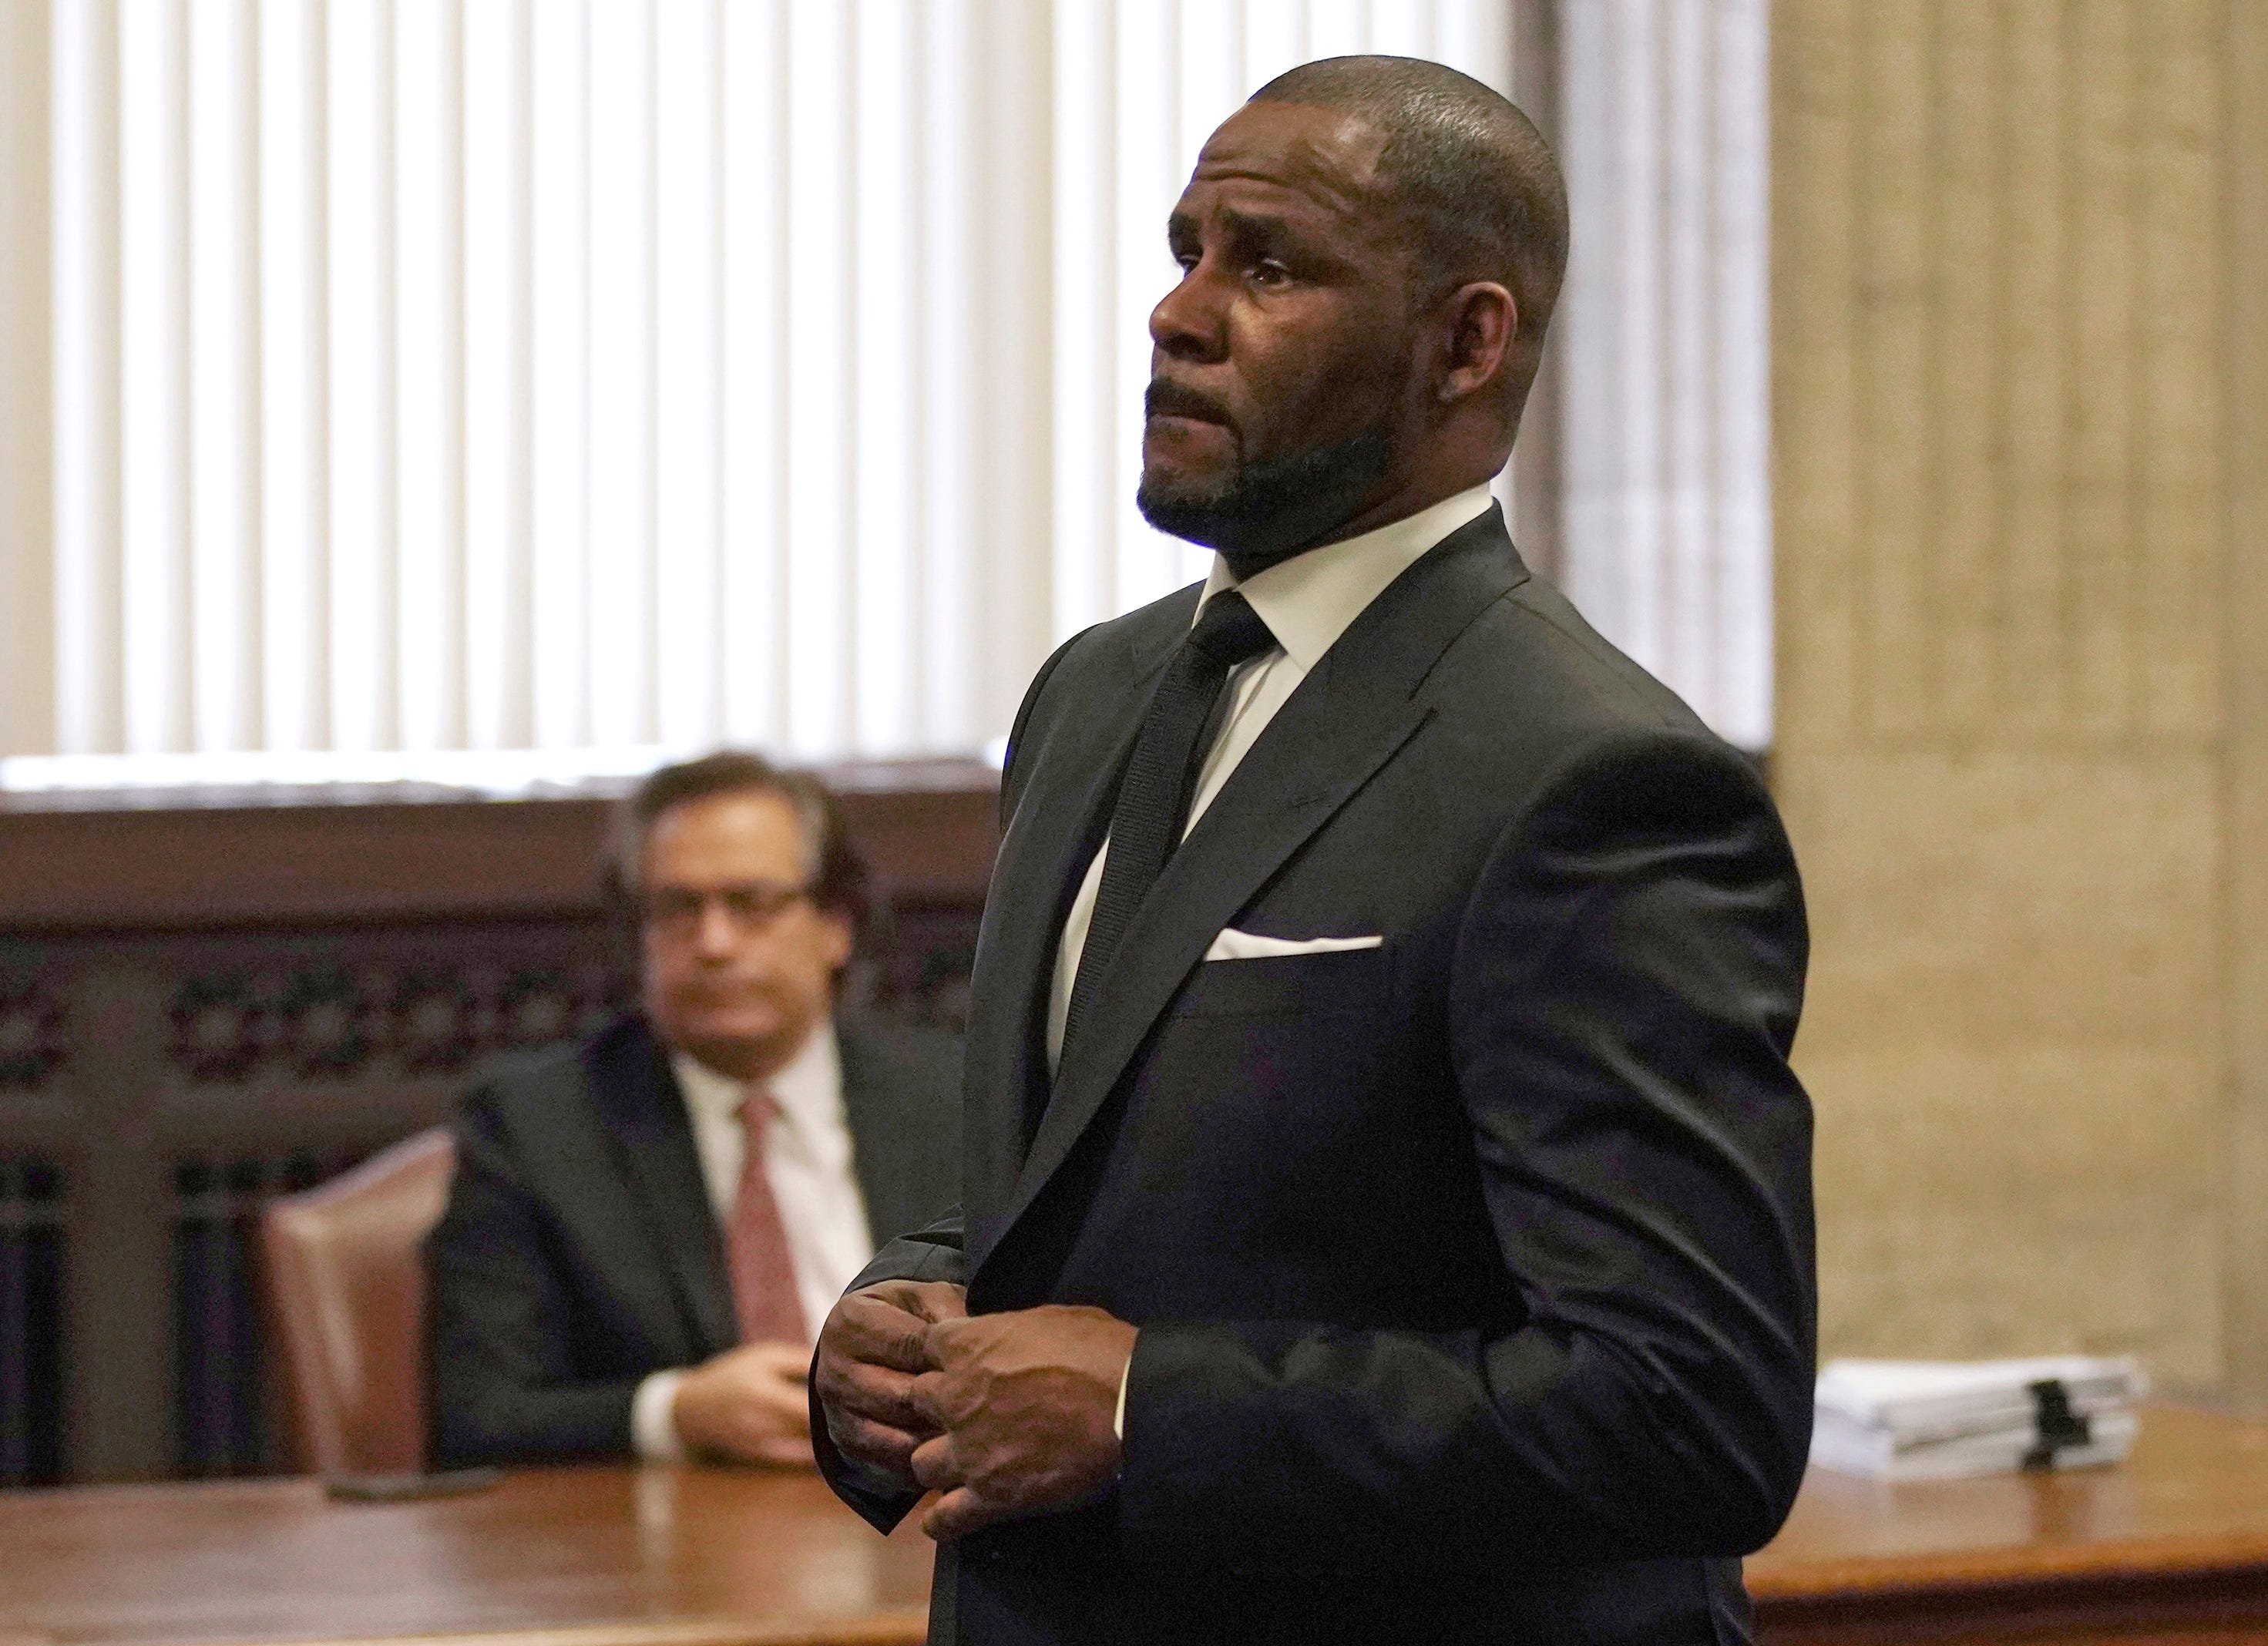 R. Kelly New York trial: Jailed singer seeks to change up lawyers